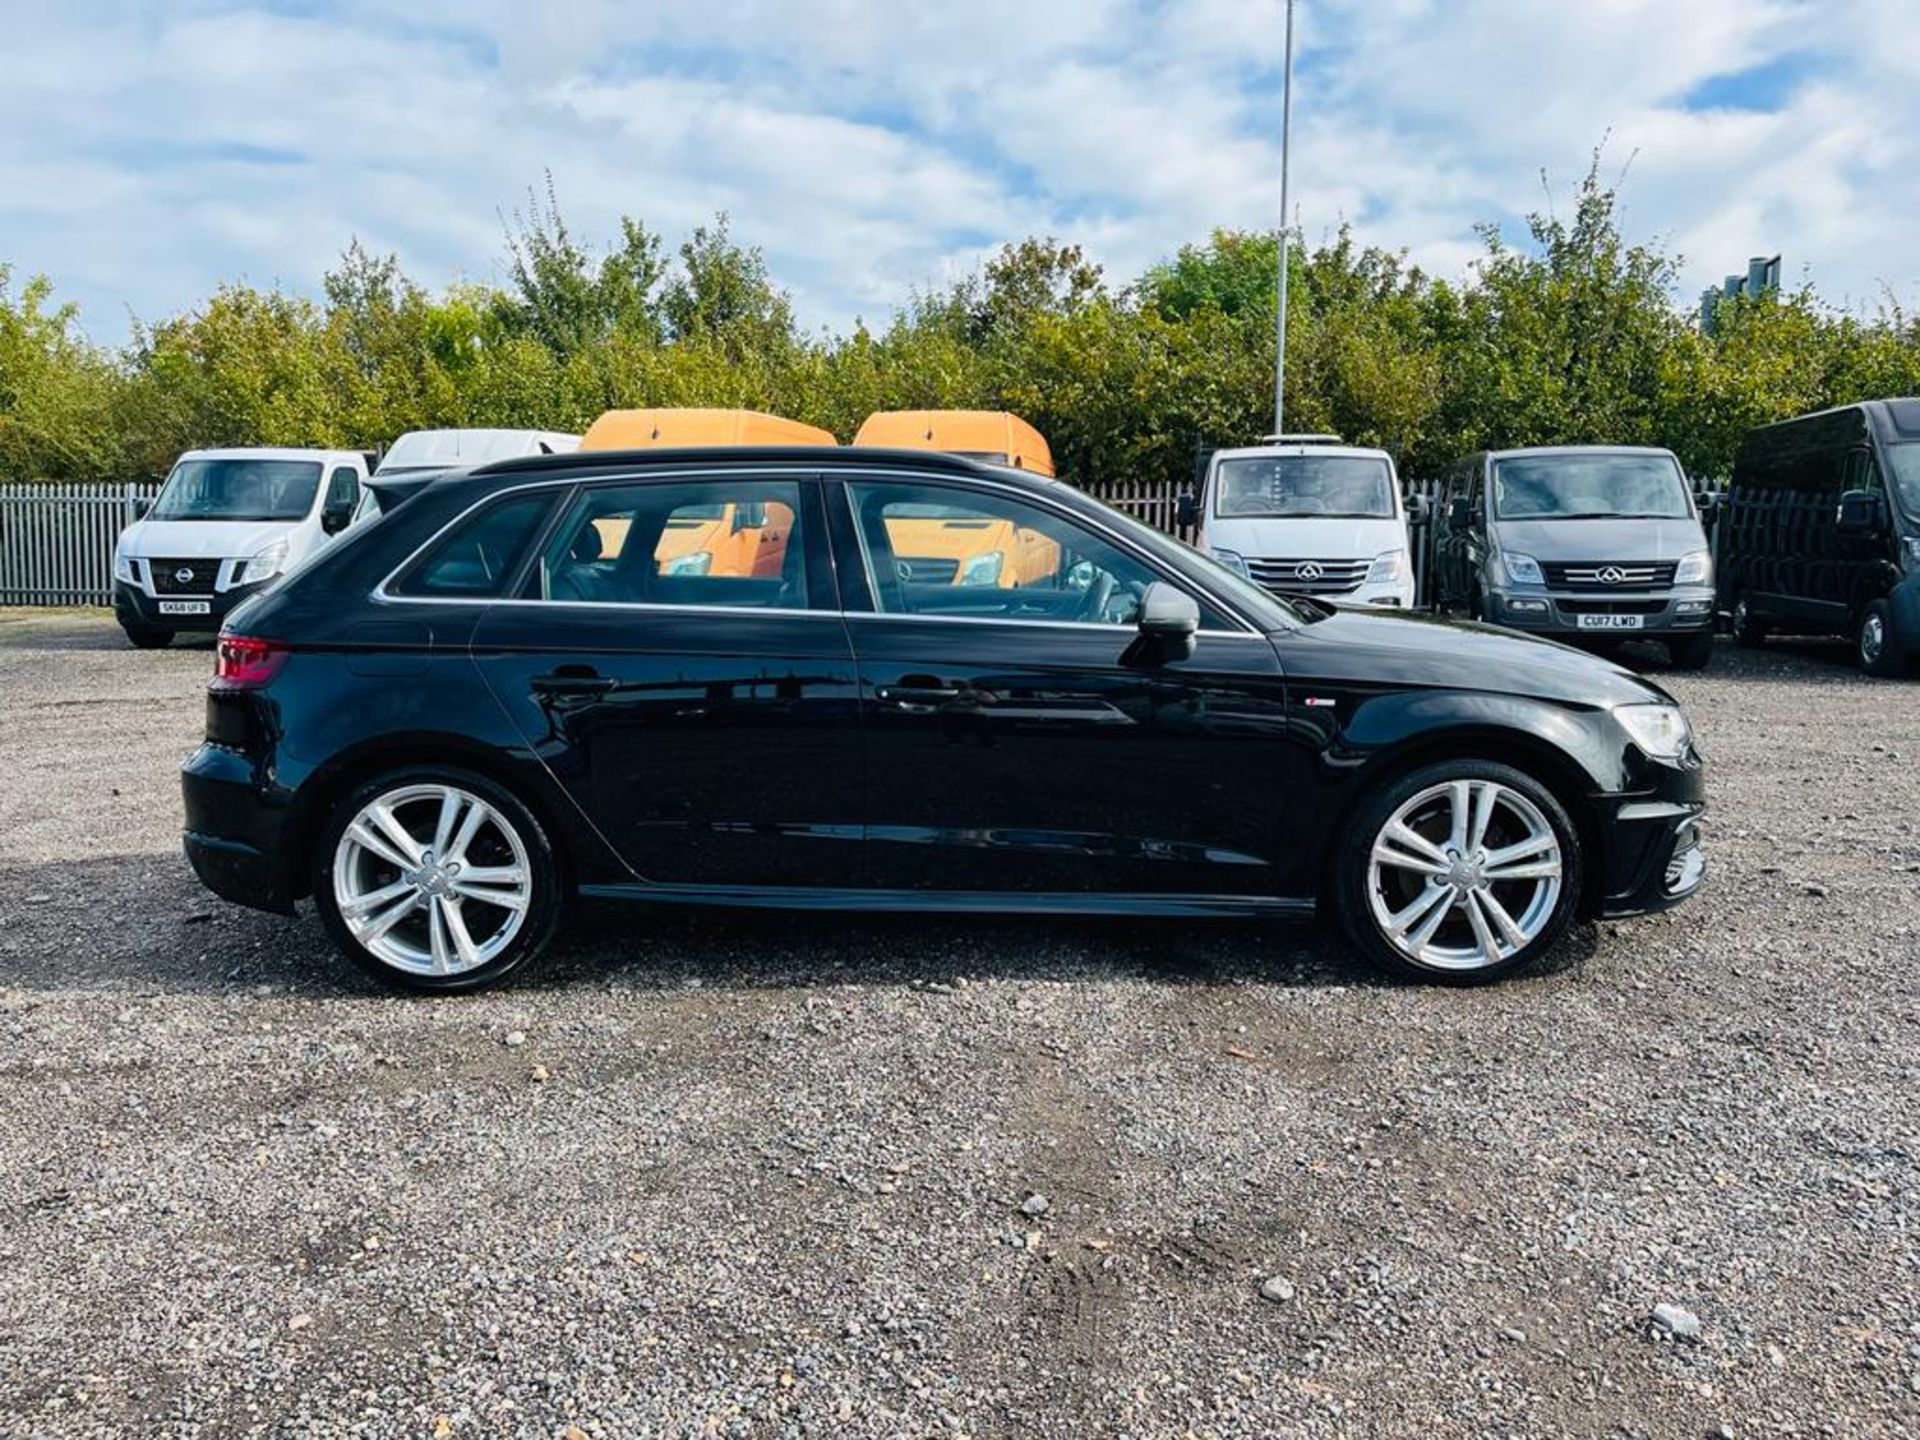 ** ON SALE ** Audi A3 S Line 105 TDI 1.6 2014 "14 Reg" Air Conditioning - Alloy Wheels - No Vat - Image 10 of 30